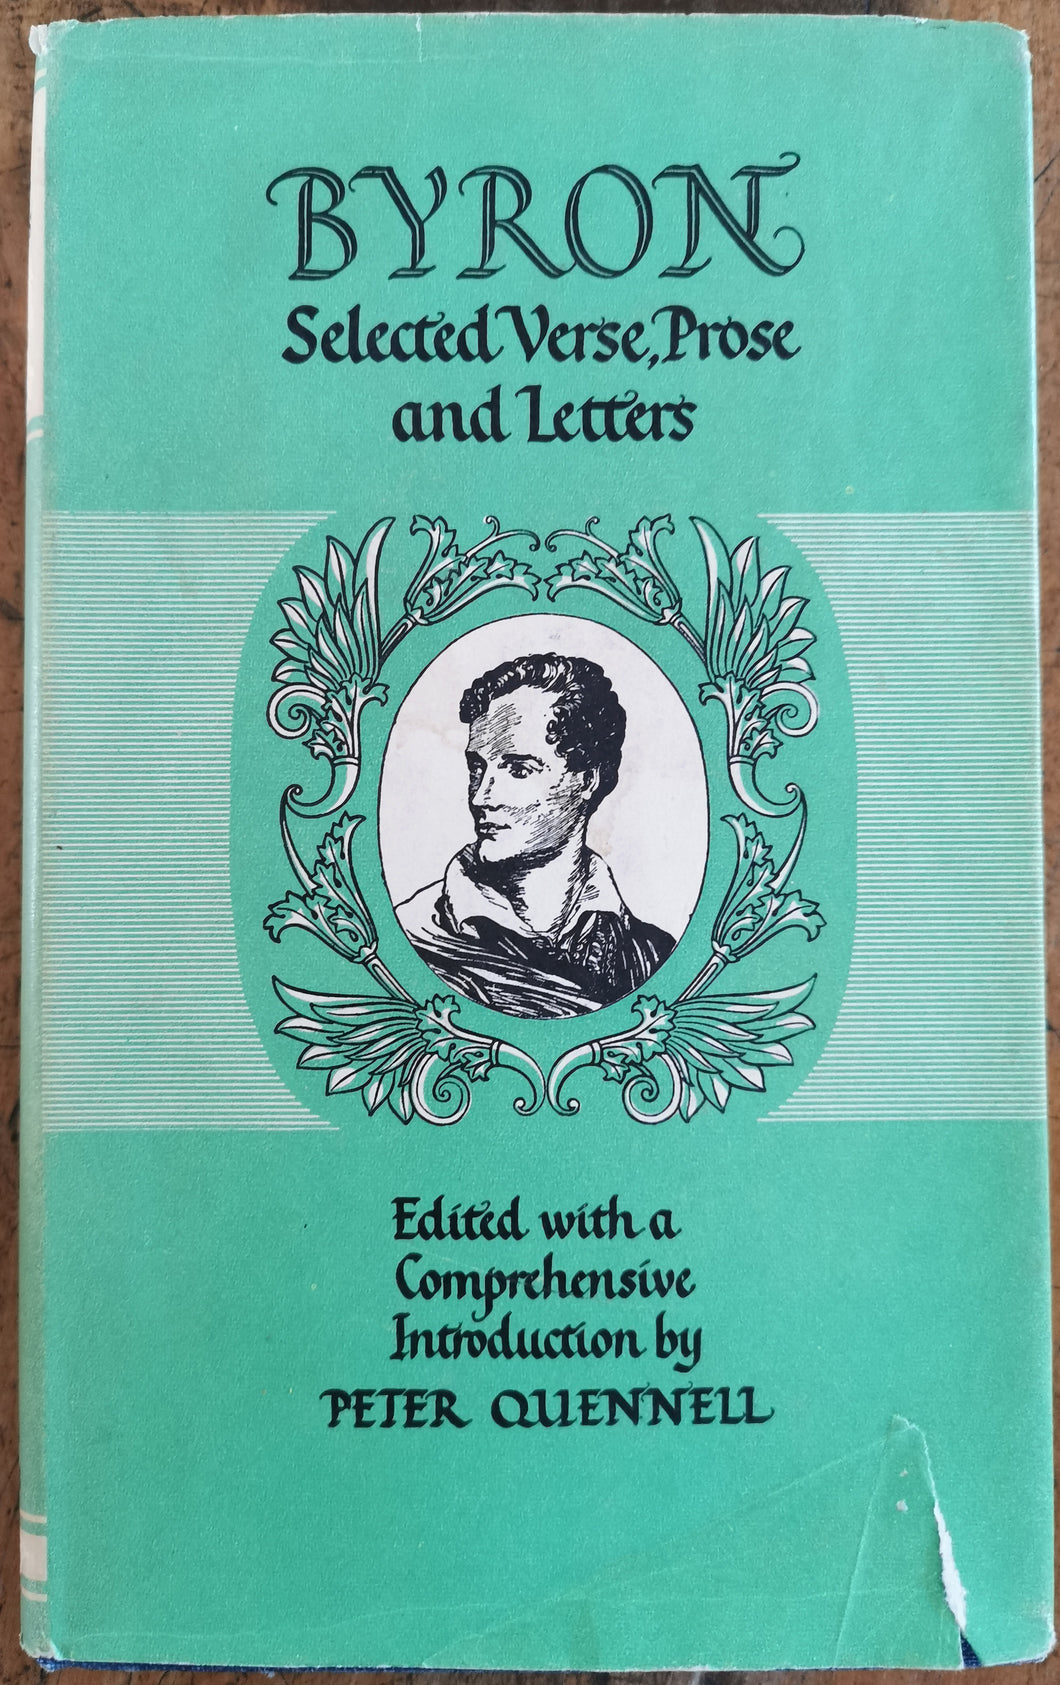 Byron - Selected Verse, Prose and Letters